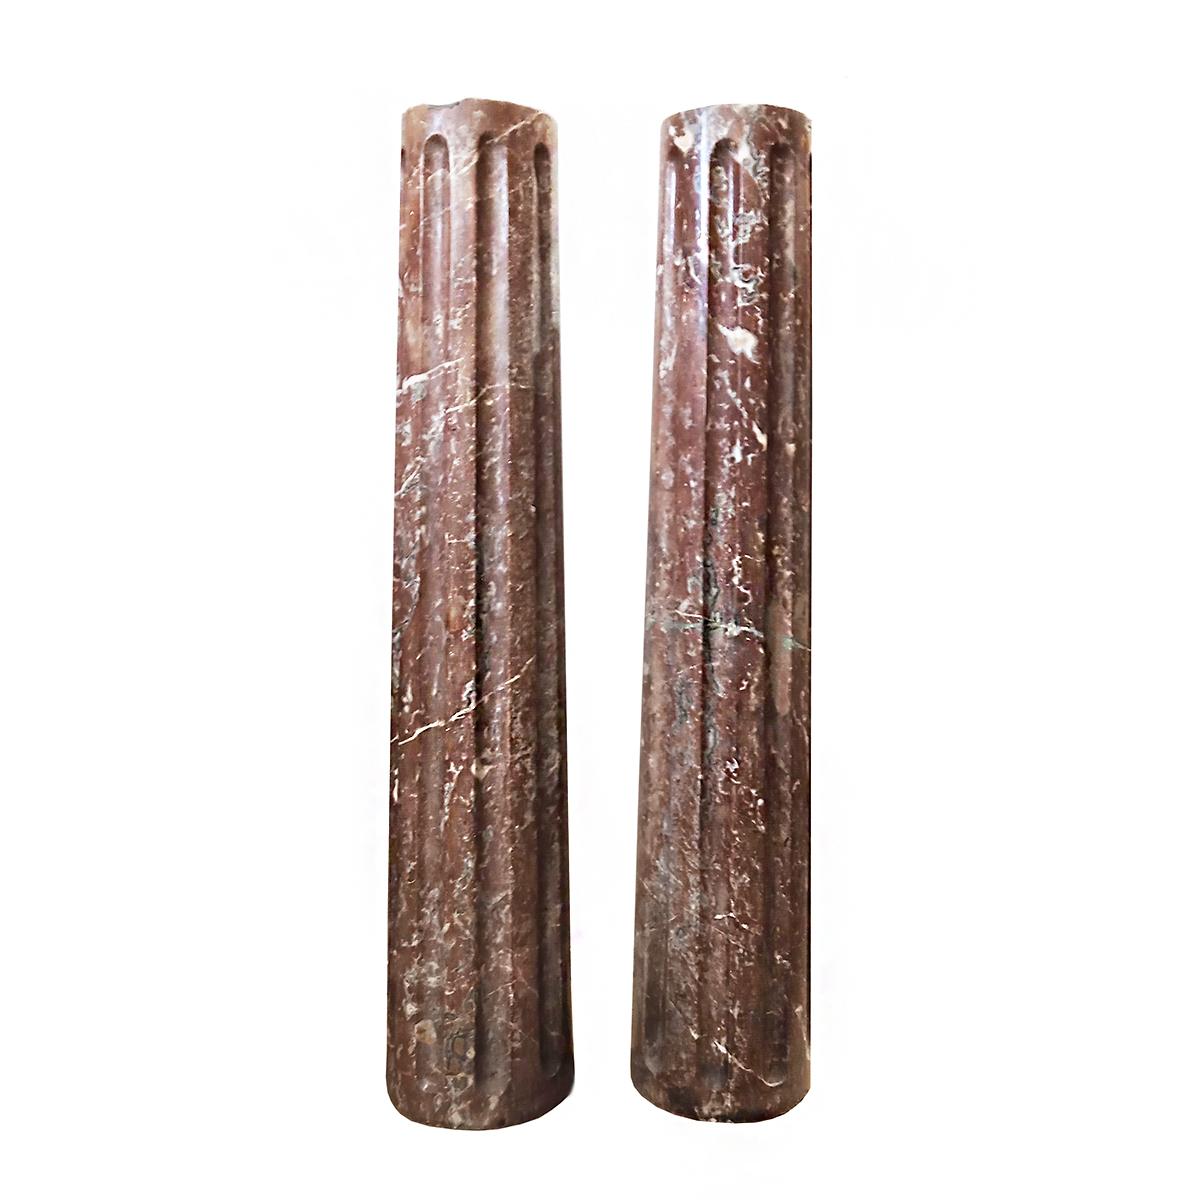 Two fluted columns, hand carved in red marble, circa 1850.
Measures: 28.5 inches high.
Ideal as pedestals, console legs, or as a decorative architectural element. Priced and sold separately.